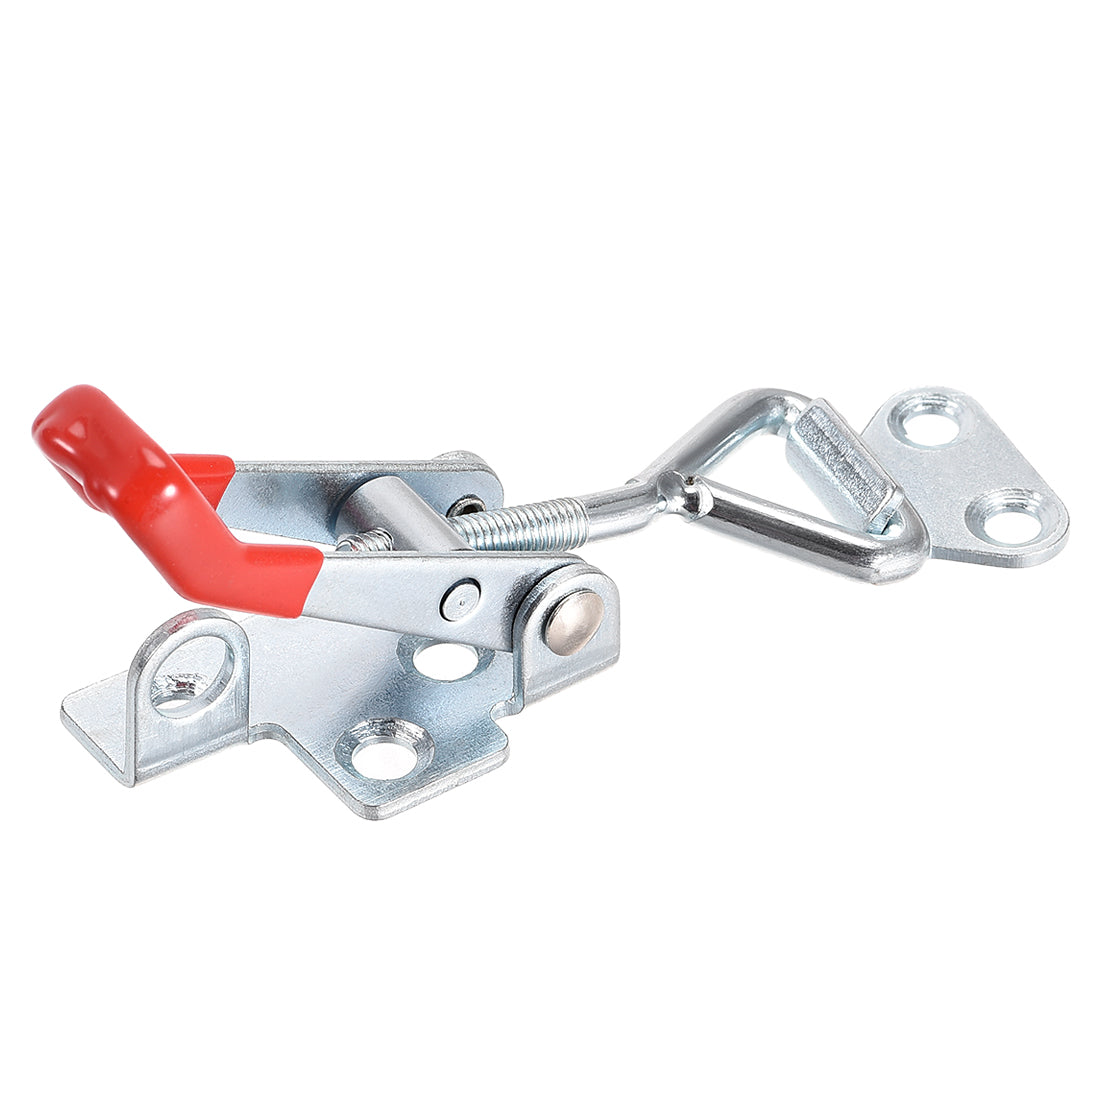 uxcell Uxcell 220lbs Holding Capacity Iron Pull-Action Latch Adjustable Toggle Clamp